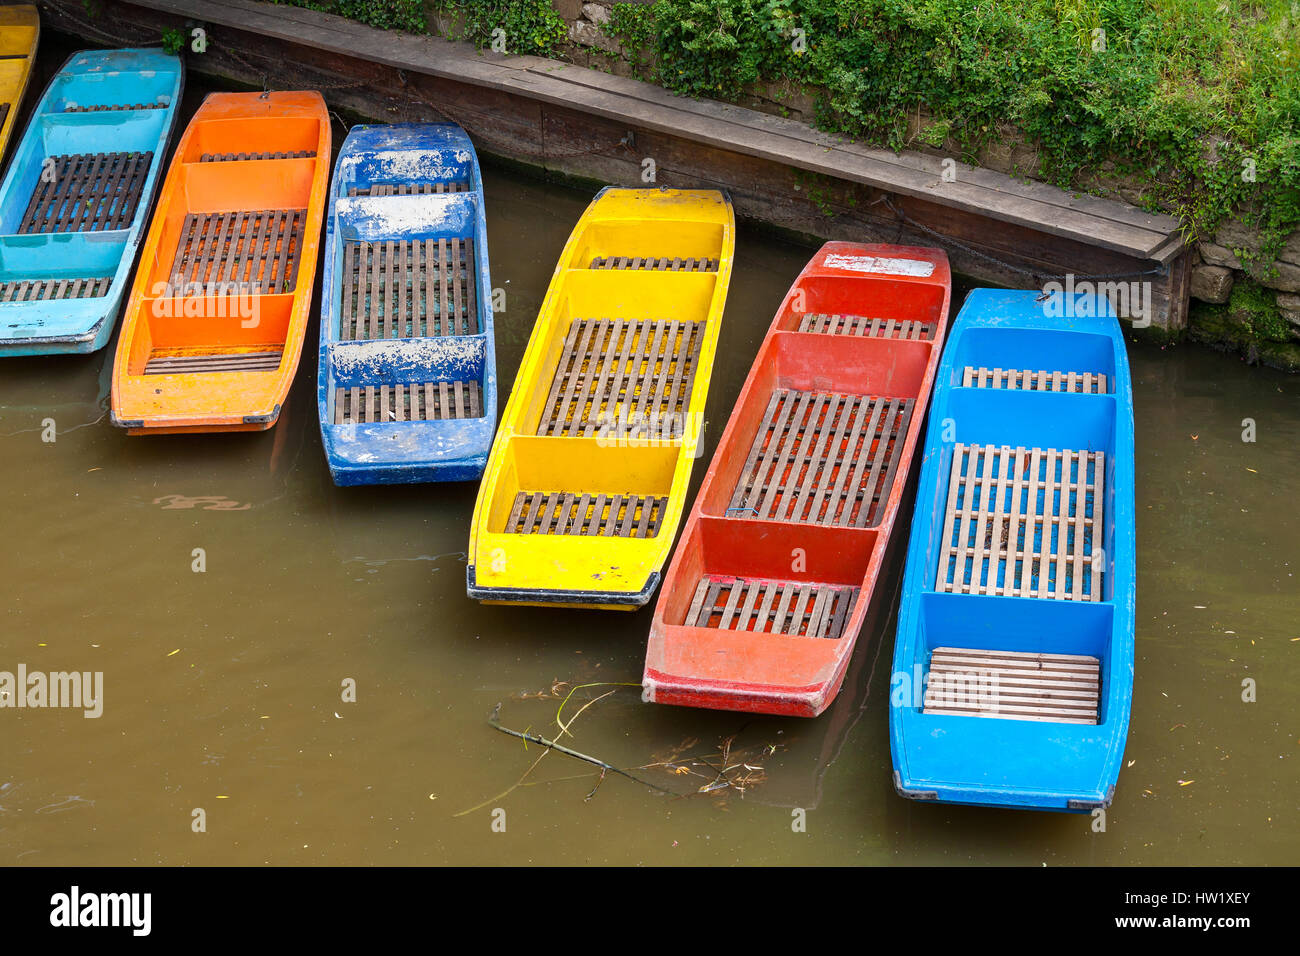 Colorful punts on the river Cherwel. Oxford, Oxfordshire, England, UK Stock Photo